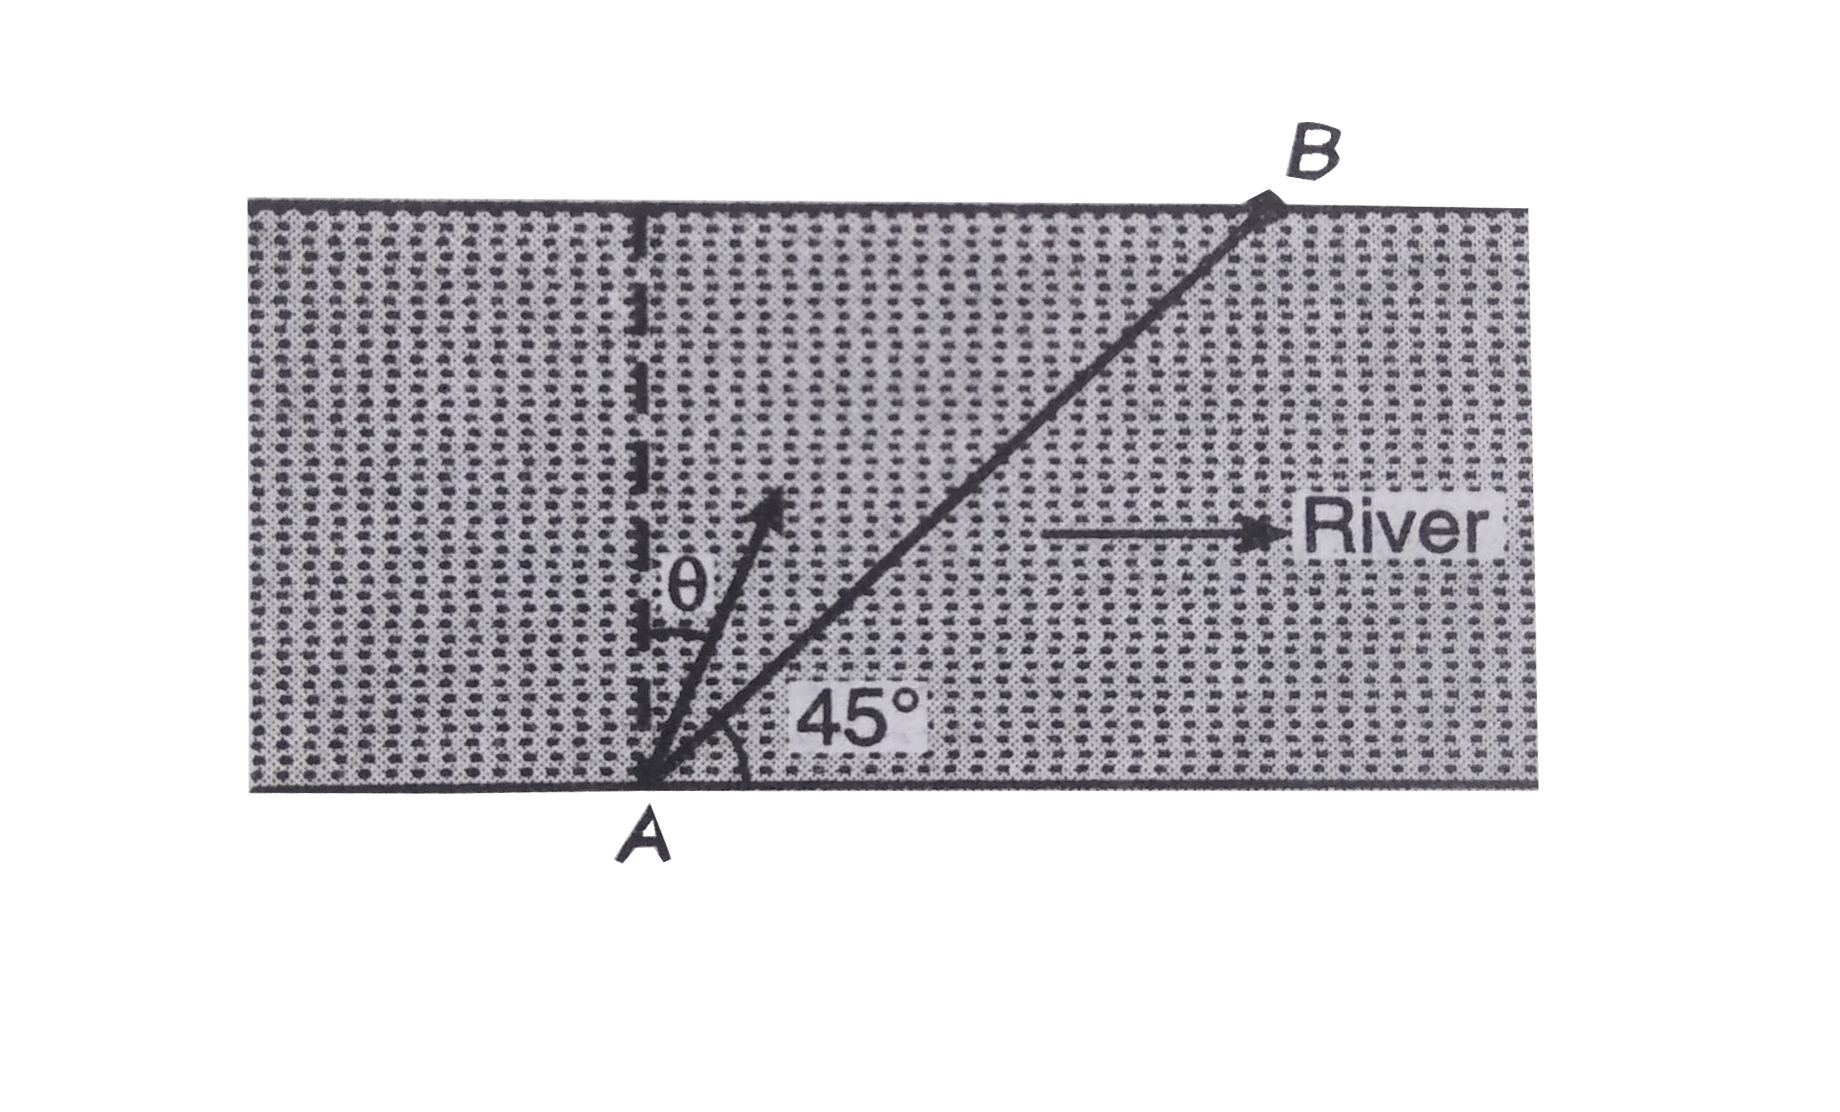 Given |Vbr| = 4 m//s = magnitude of velocity of boatman with respect to river, vr= 2 m//s in the directior shown. Boatman wants to reach from point A to point B. At what angle theta should he row his boat ?